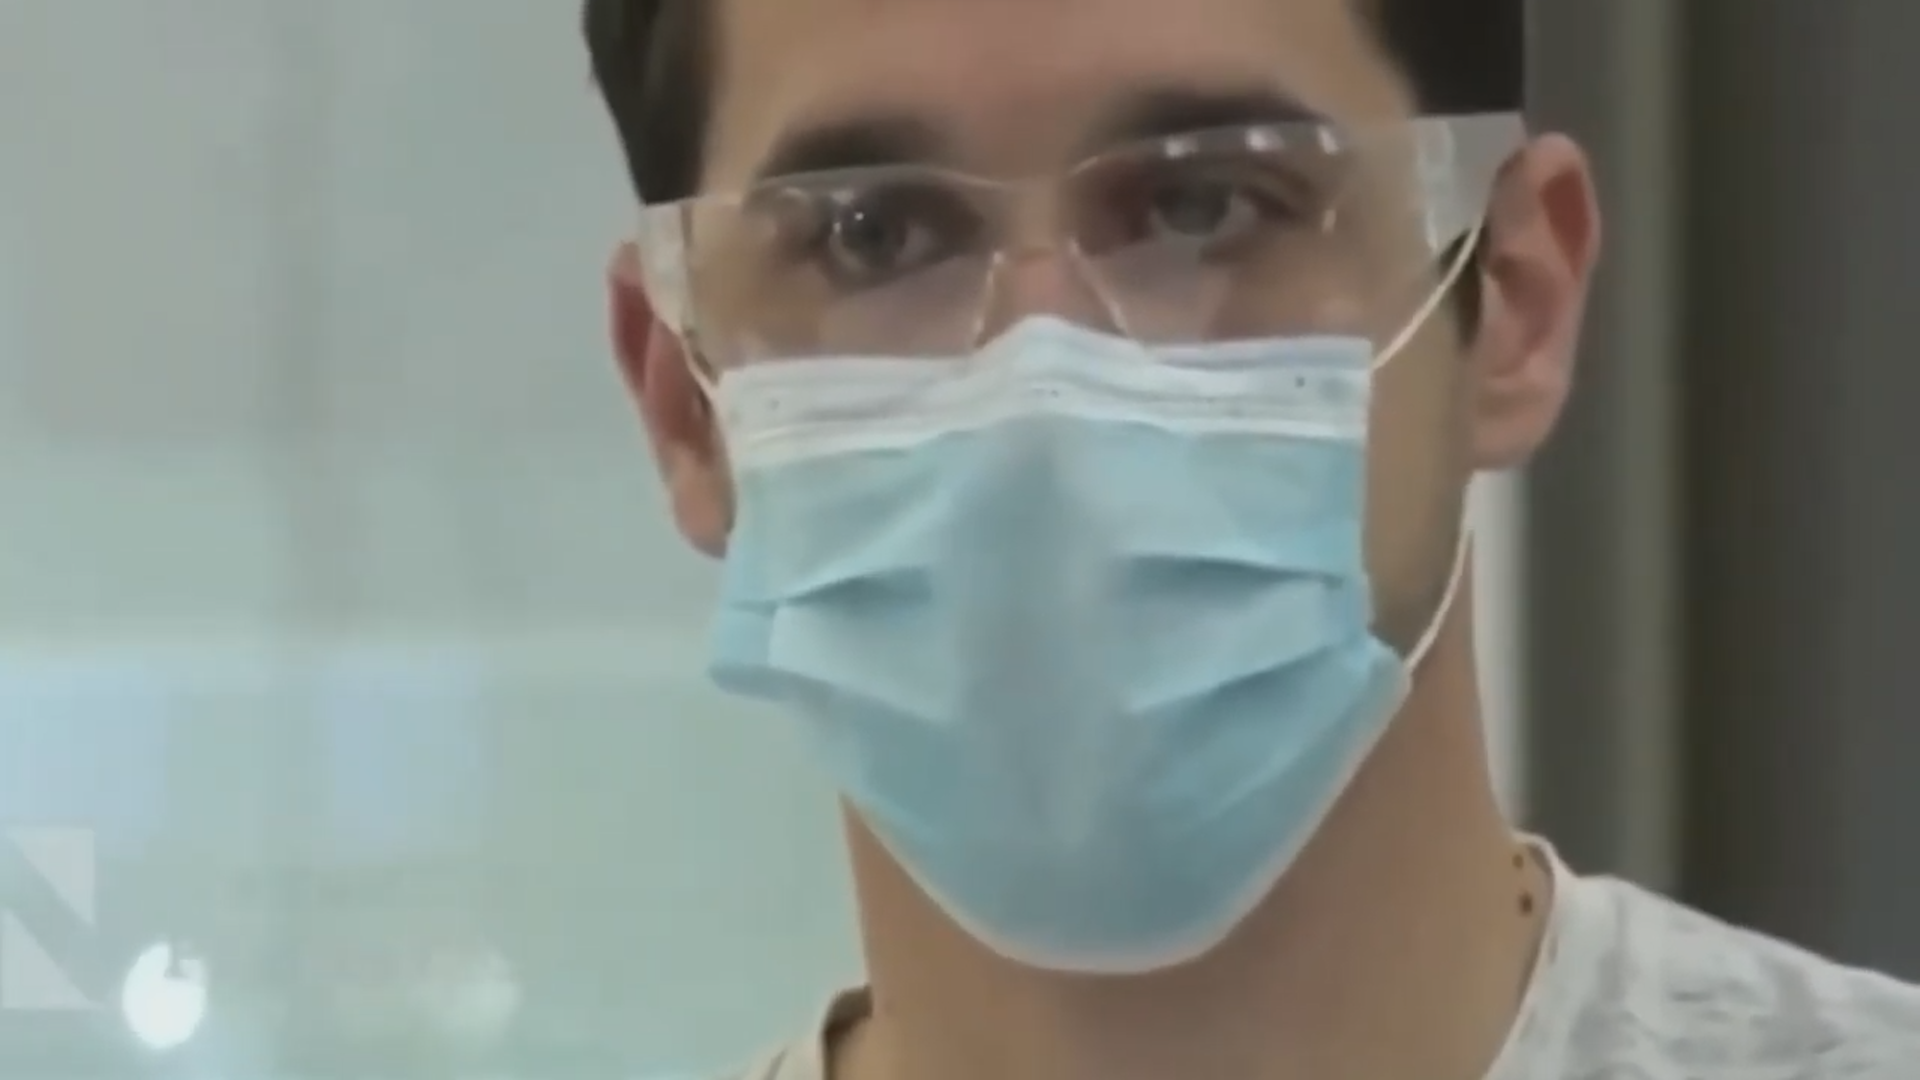 A man wearing a surgical face mask and eye goggles